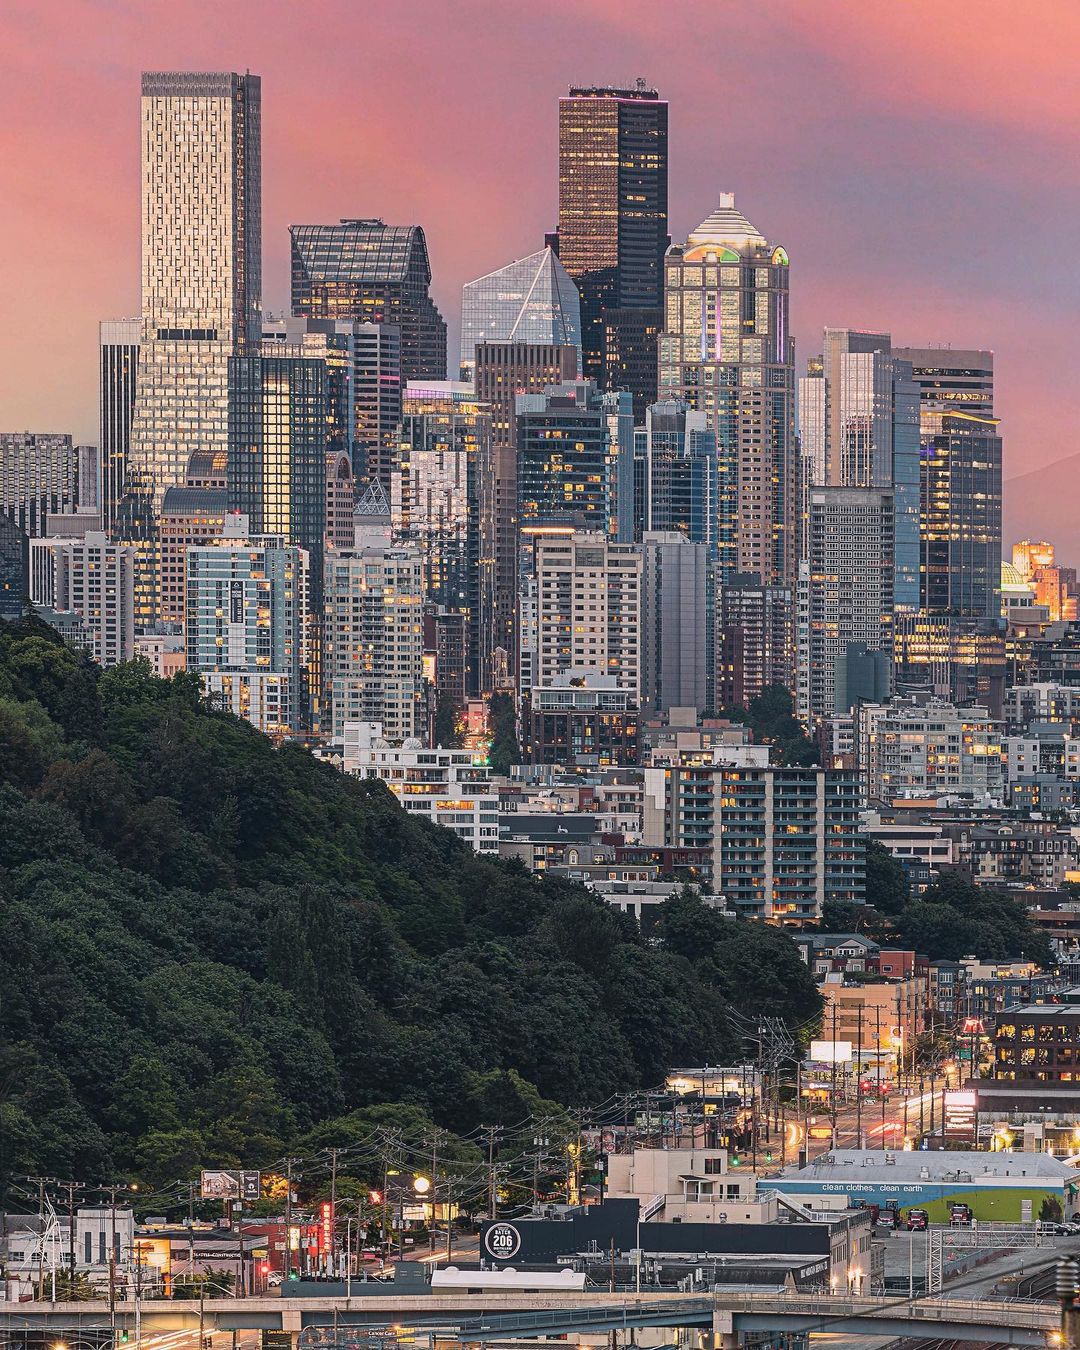 Downtown Seattle, WA Skyline at Dusk with Lights Turning On. Photo by Instagram user @chrisfabregas